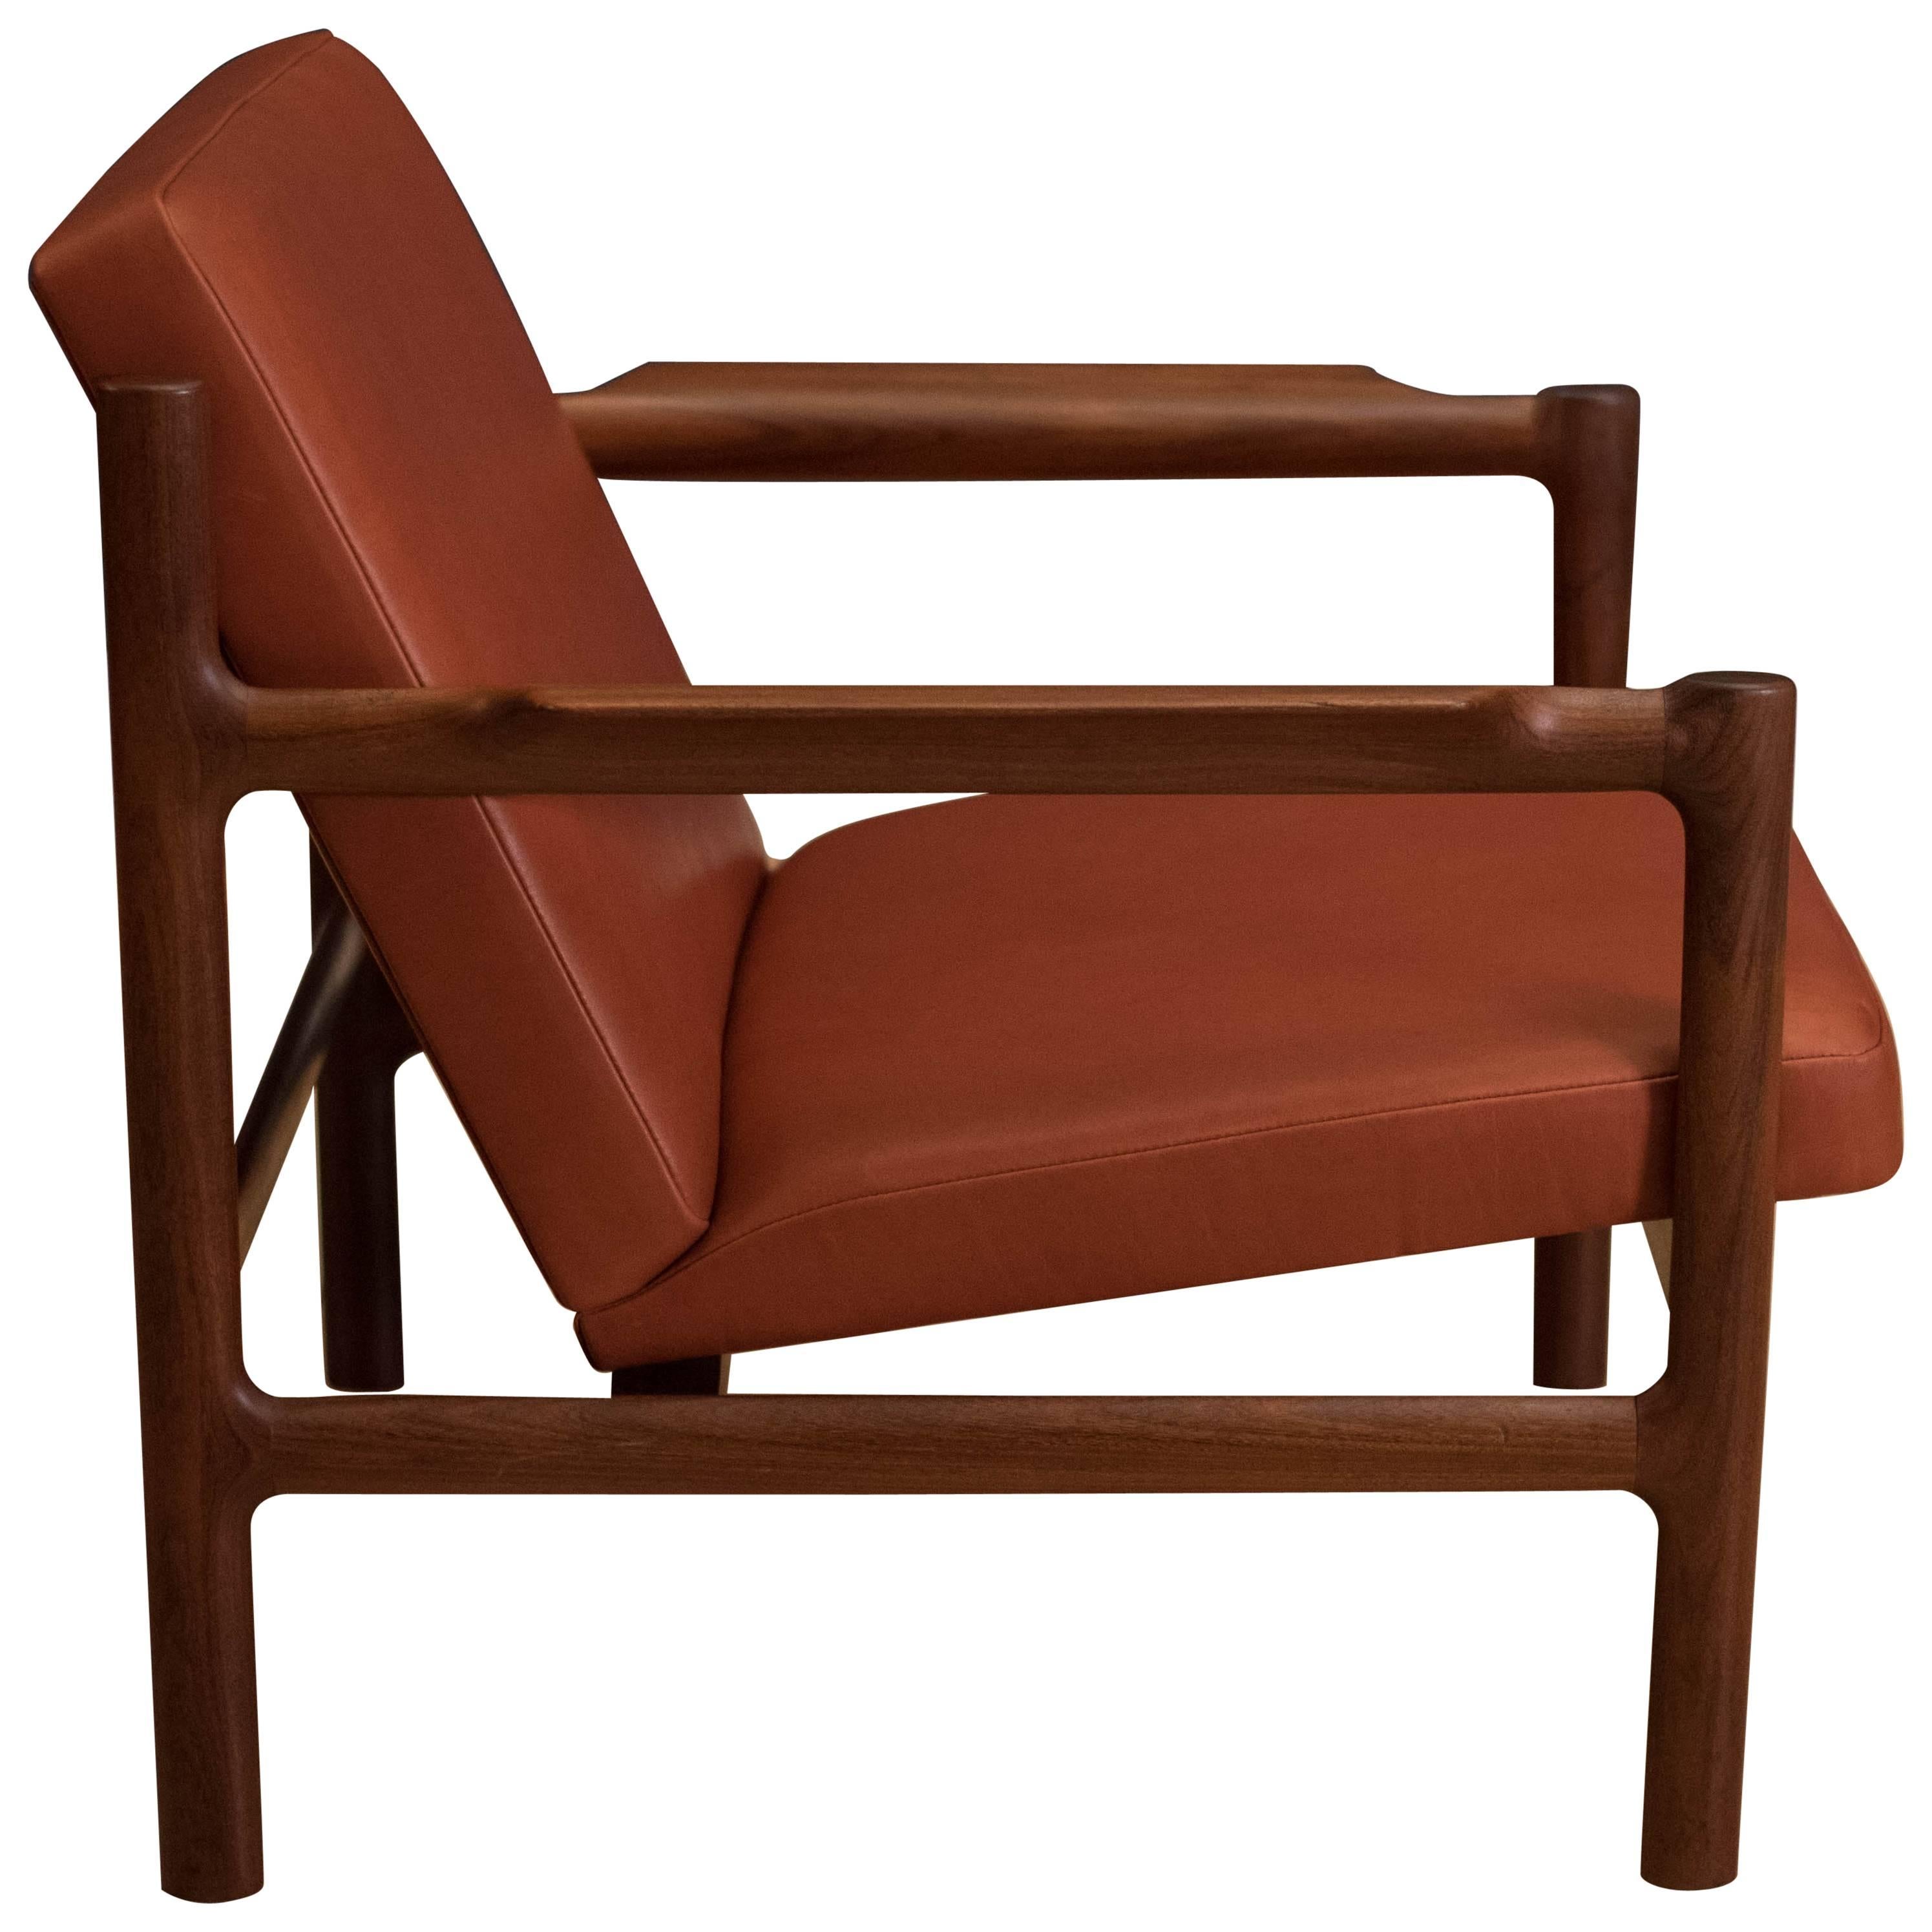 Mid Century Teak and Leather Lounge Chair by Bruksbo